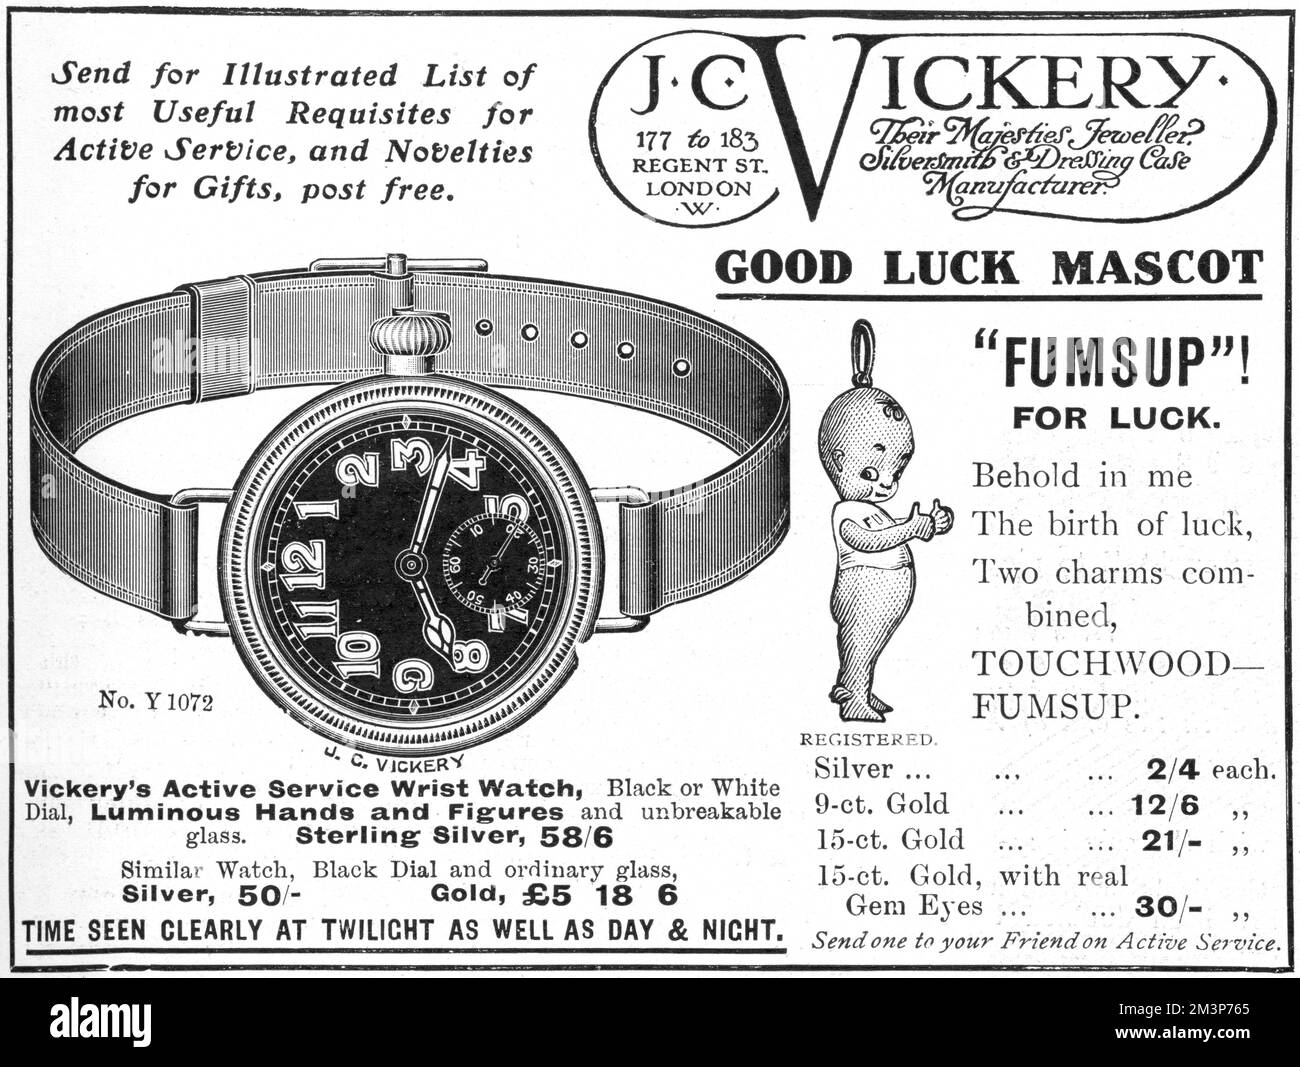 Advertisement for J C. Vickery, Their Majesties' Jeweller, featuring an active service watch with luminous hands and figures and 'FUMSUP' for luck, a popular  lucky charm or talisman for soldiers. Stock Photo